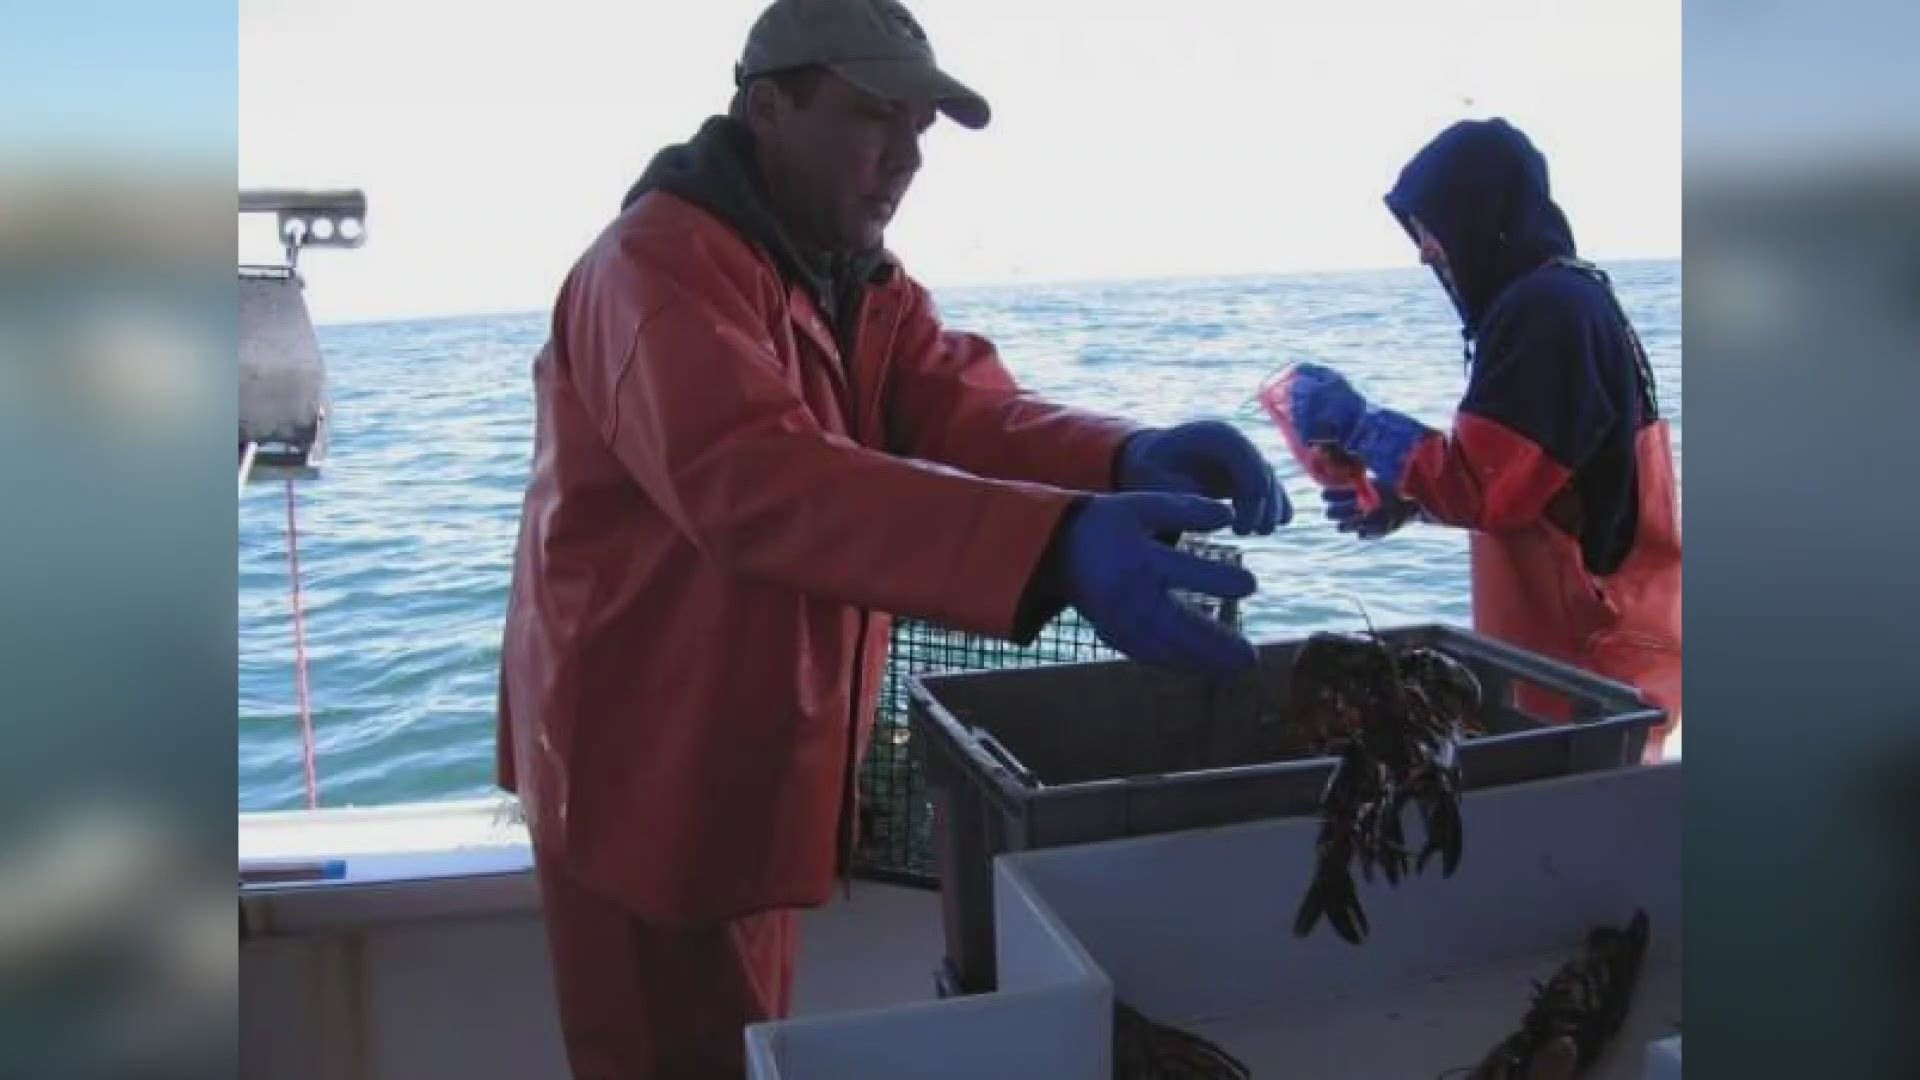 Maine's Congressional delegation is asking President Biden to help protect the lobster industry from proposed regulations aimed at protecting right whales.